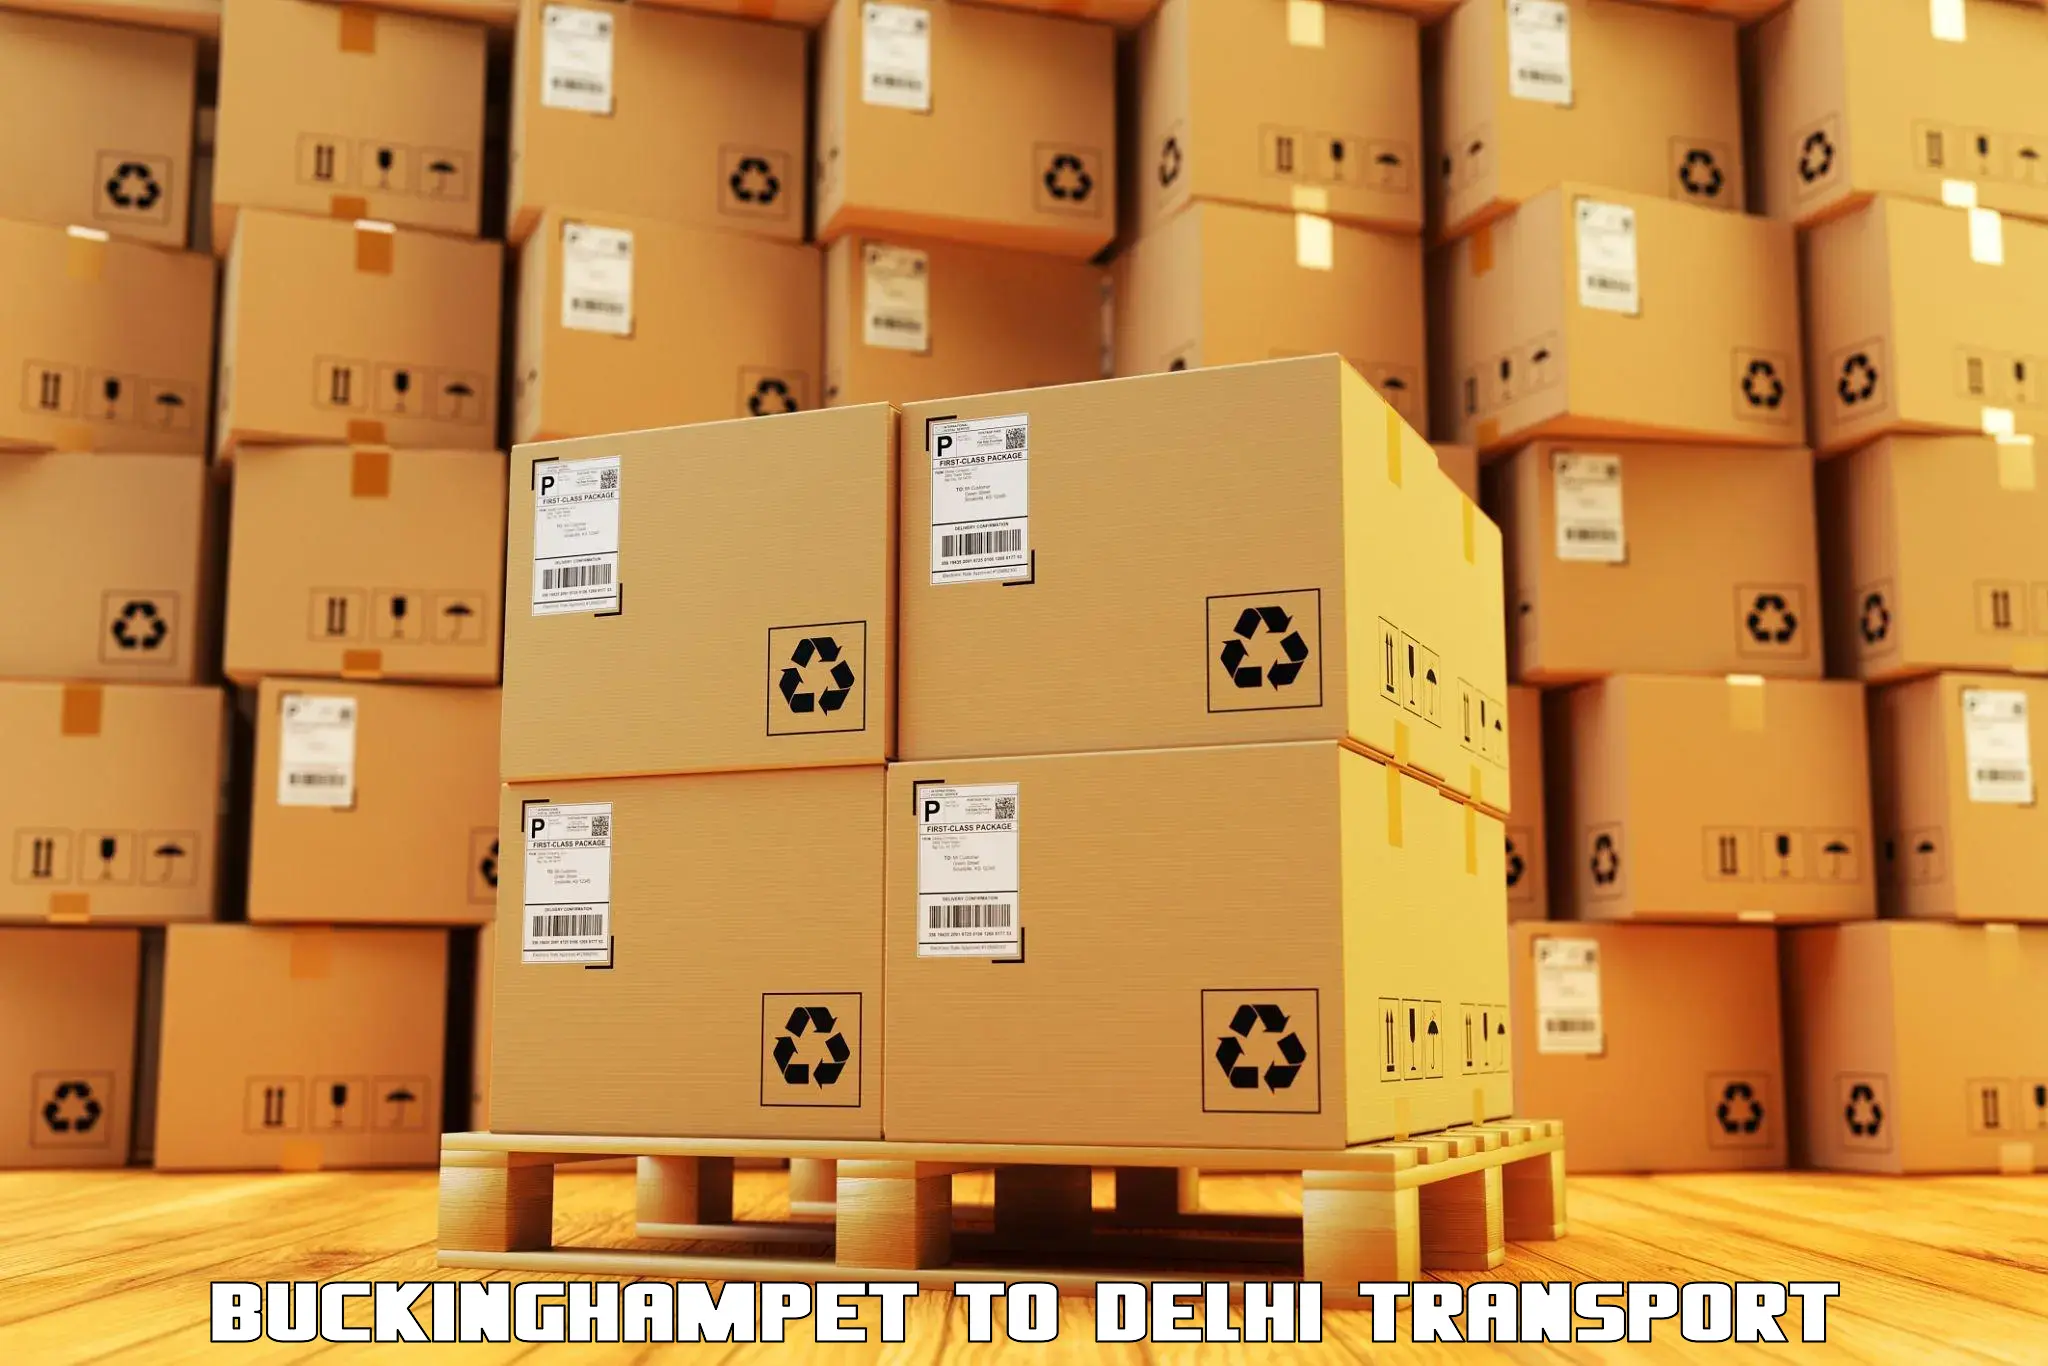 Container transportation services Buckinghampet to East Delhi